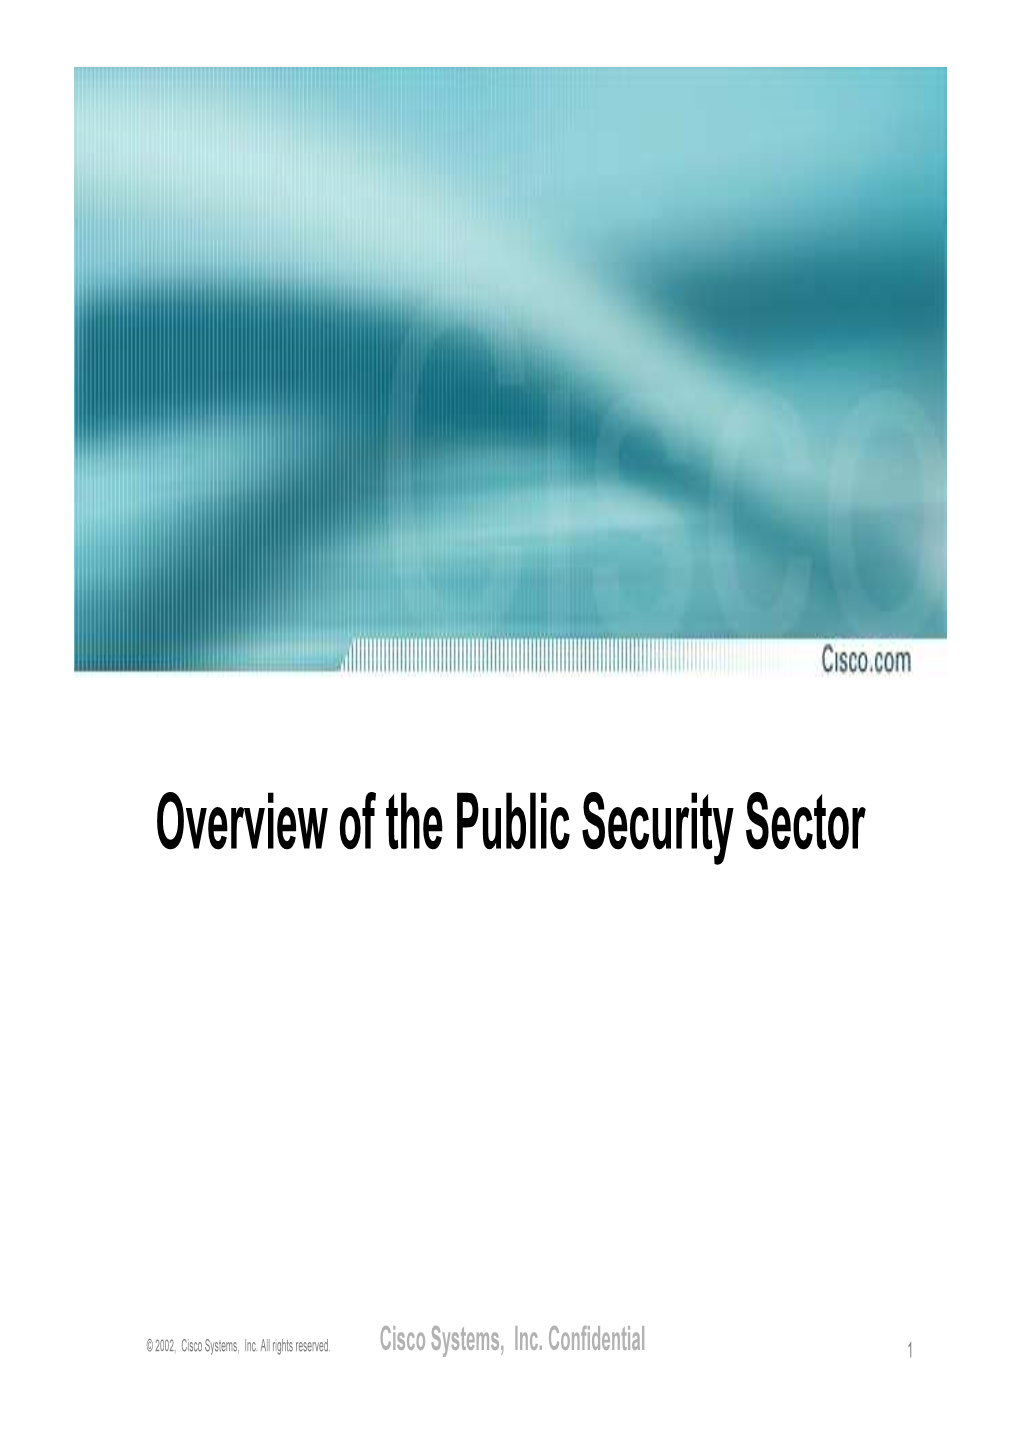 Overview of the Public Security Sector